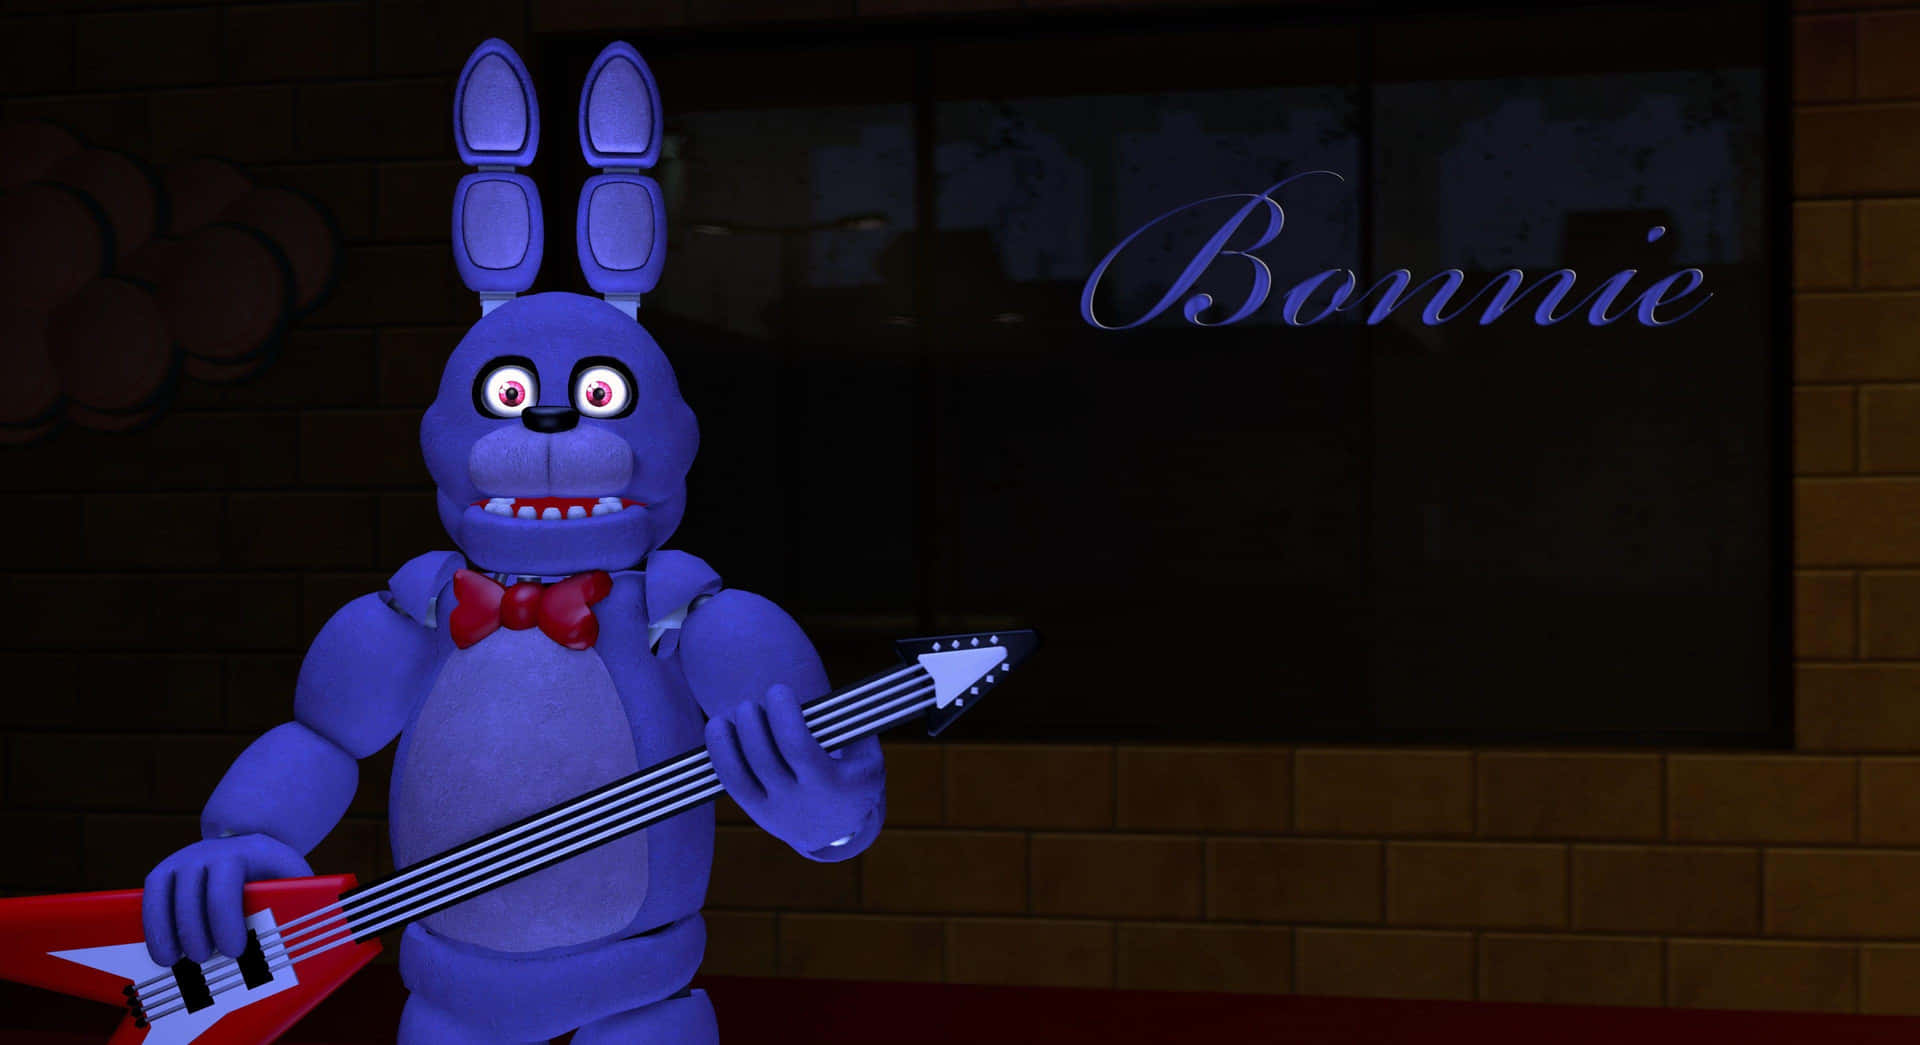 Bonnie the Bunny - The Cute and Cuddly Friend Wallpaper